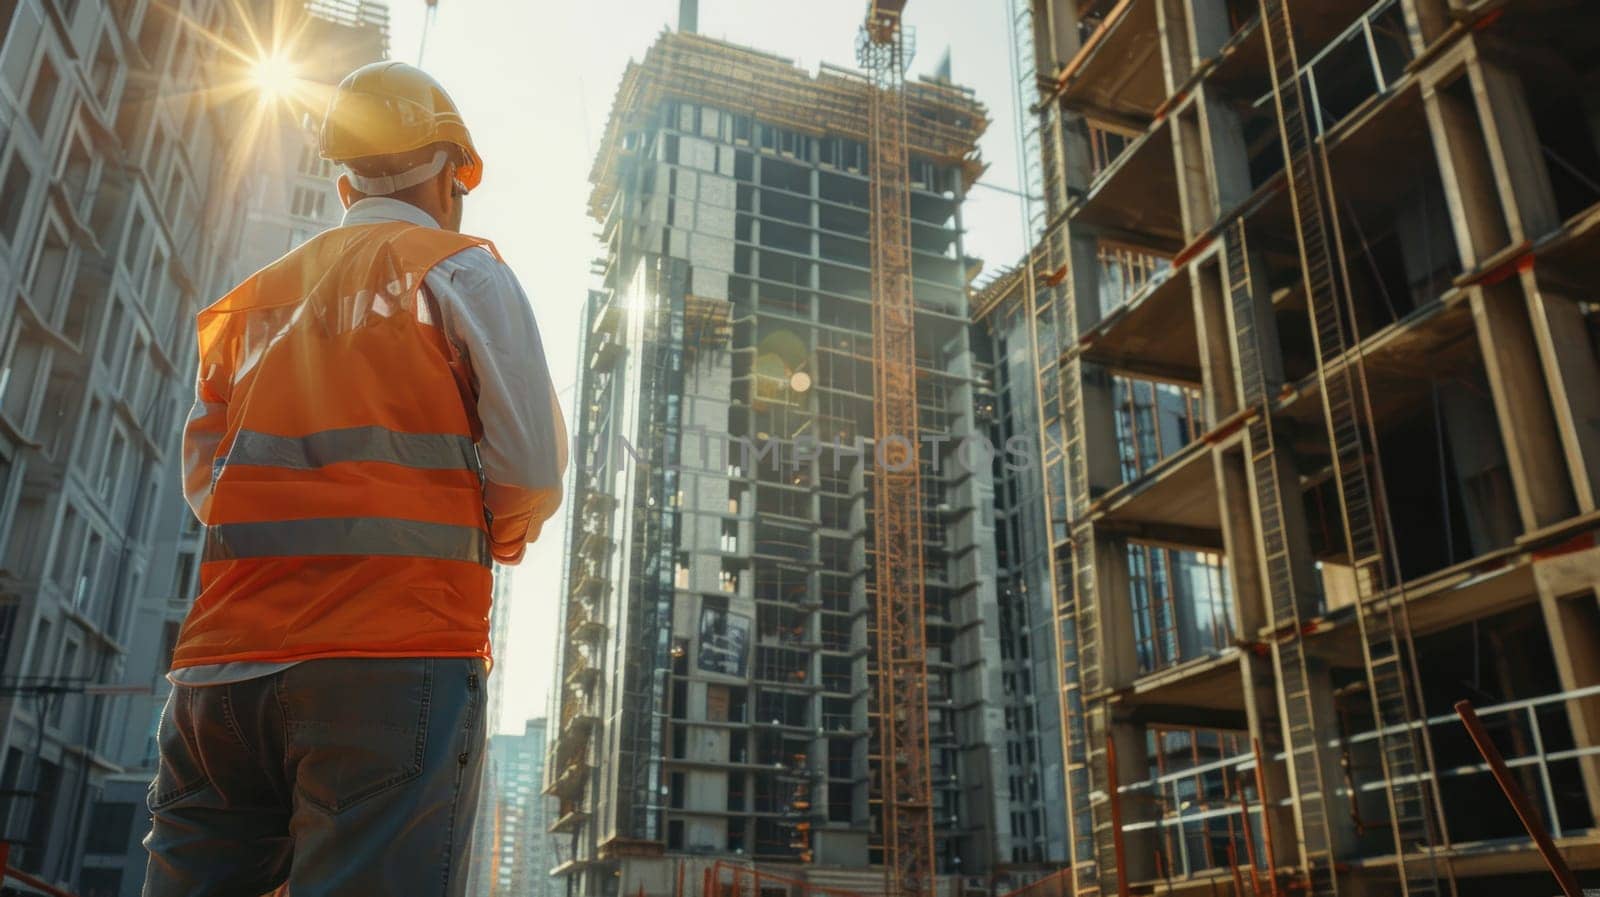 A construction worker in an orange vest stands in front of a building.